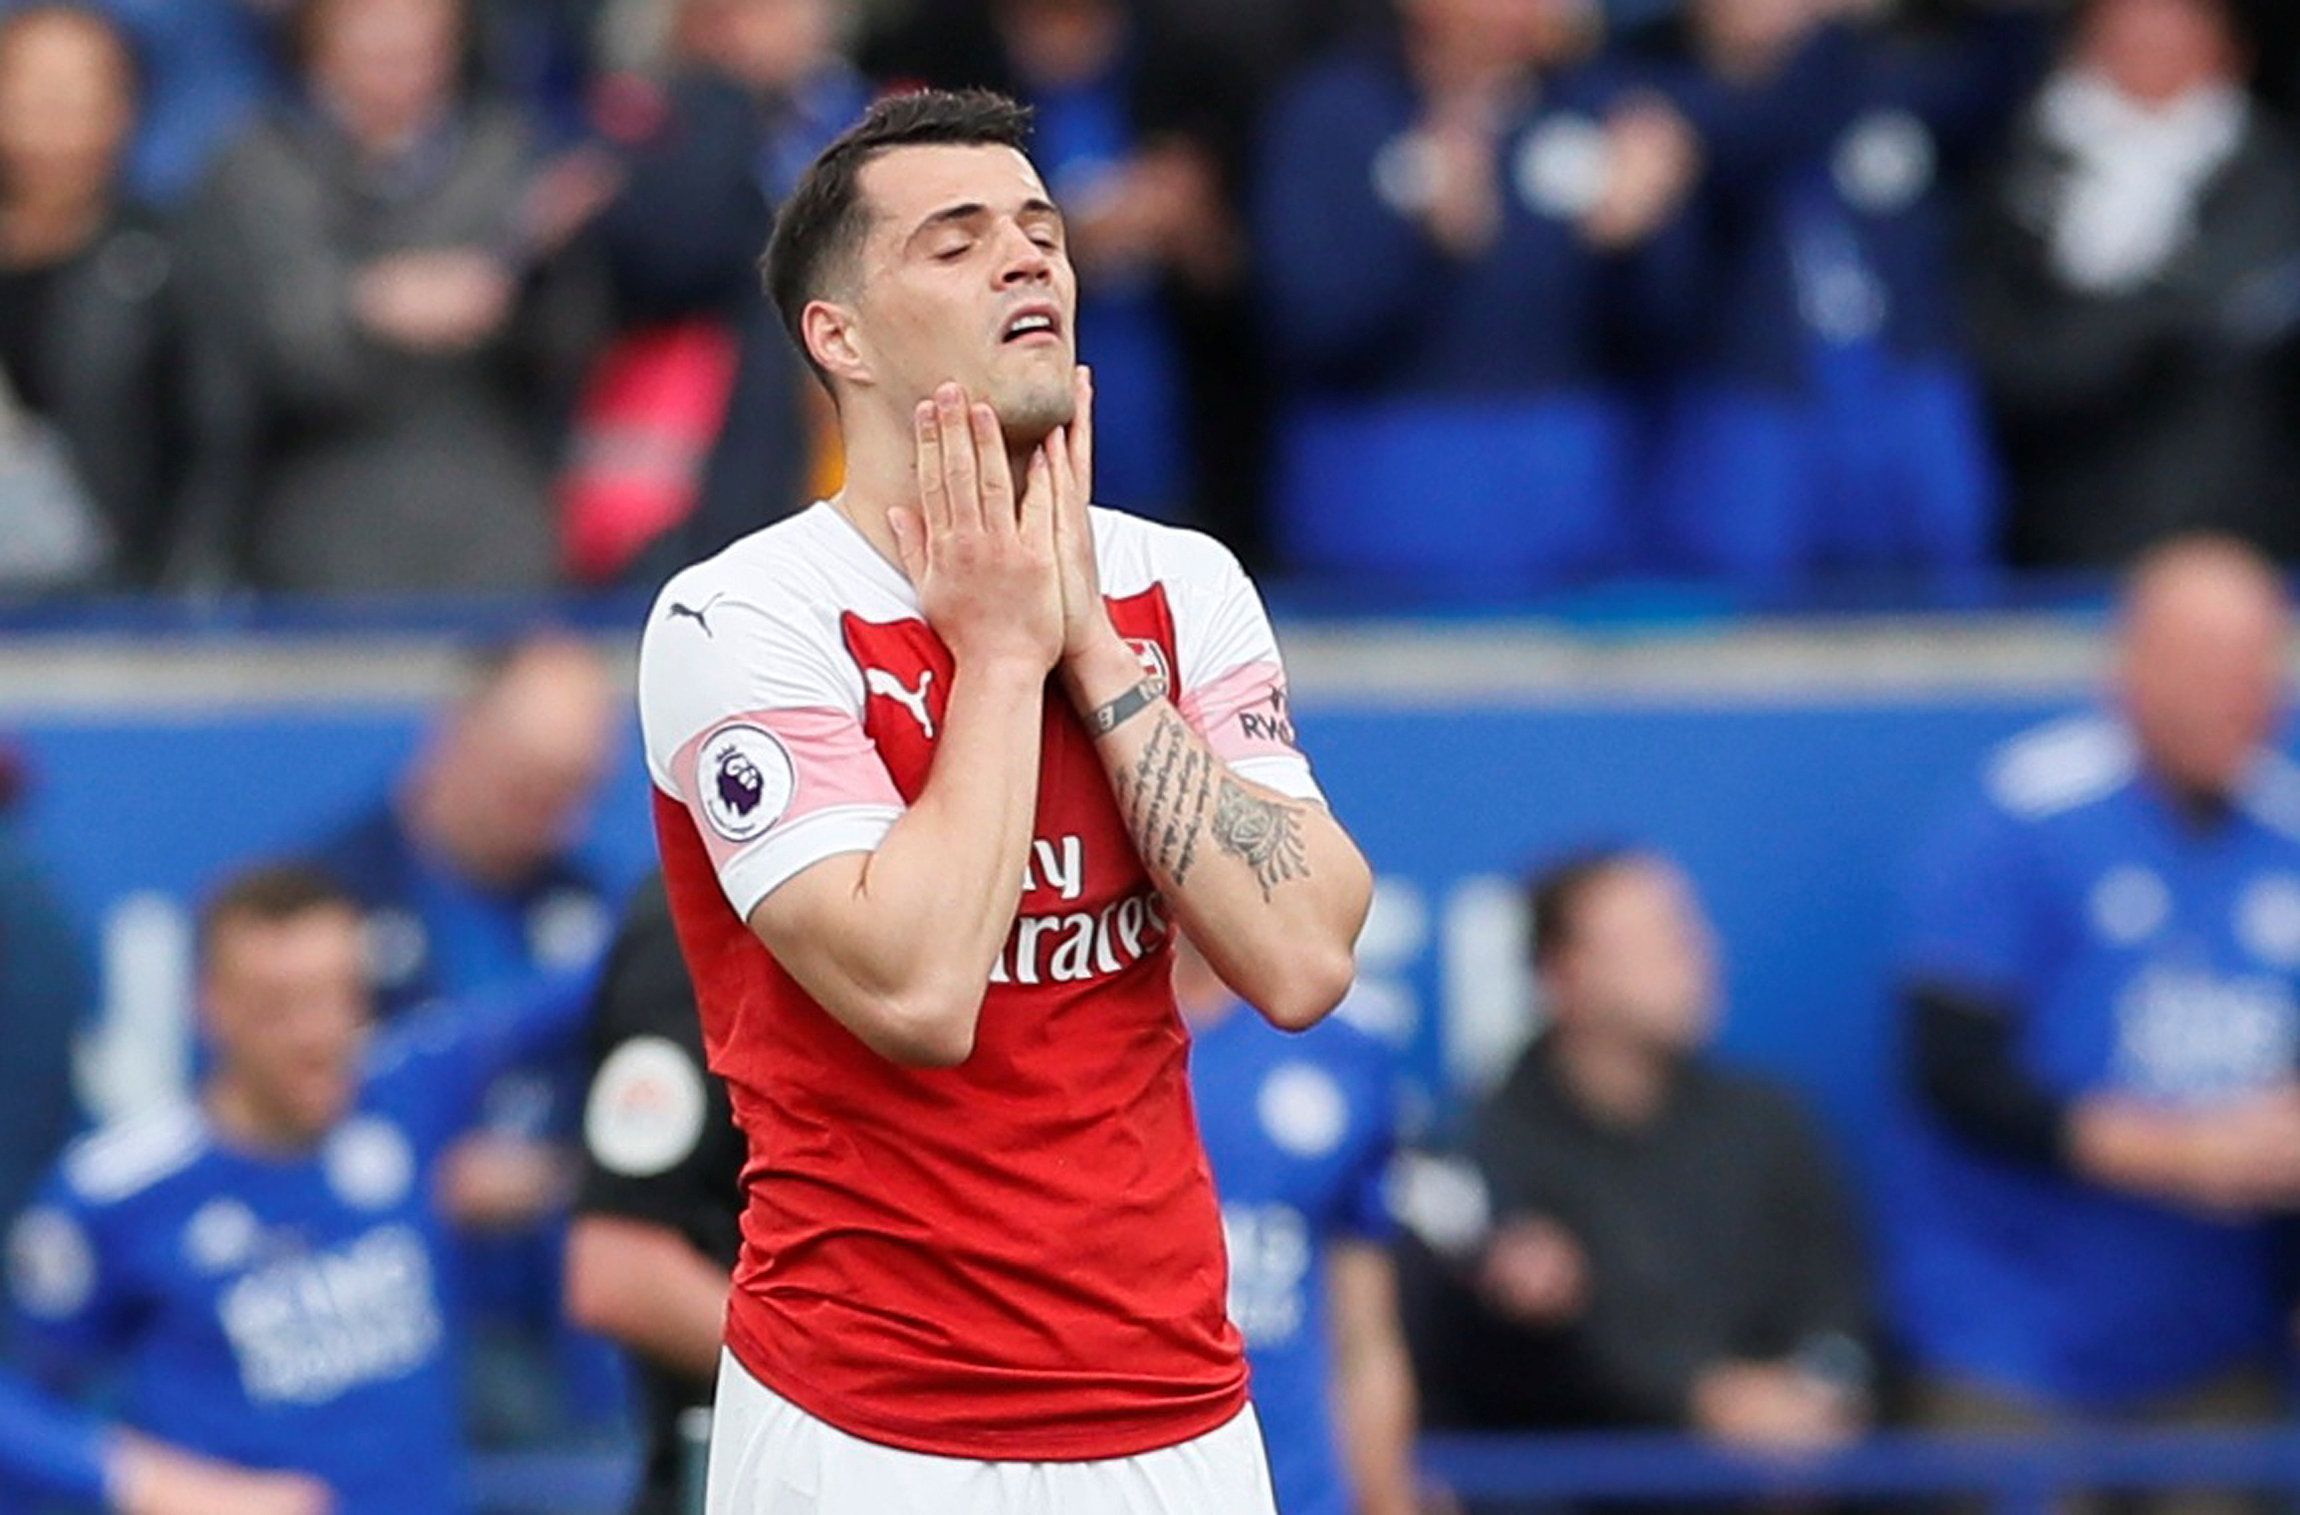 Soccer Football - Premier League - Leicester City v Arsenal - King Power Stadium, Leicester, Britain - April 28, 2019  Arsenal's Granit Xhaka reacts after conceding their second goal scored by Leicester City's Jamie Vardy                         REUTERS/David Klein  EDITORIAL USE ONLY. No use with unauthorized audio, video, data, fixture lists, club/league logos or 